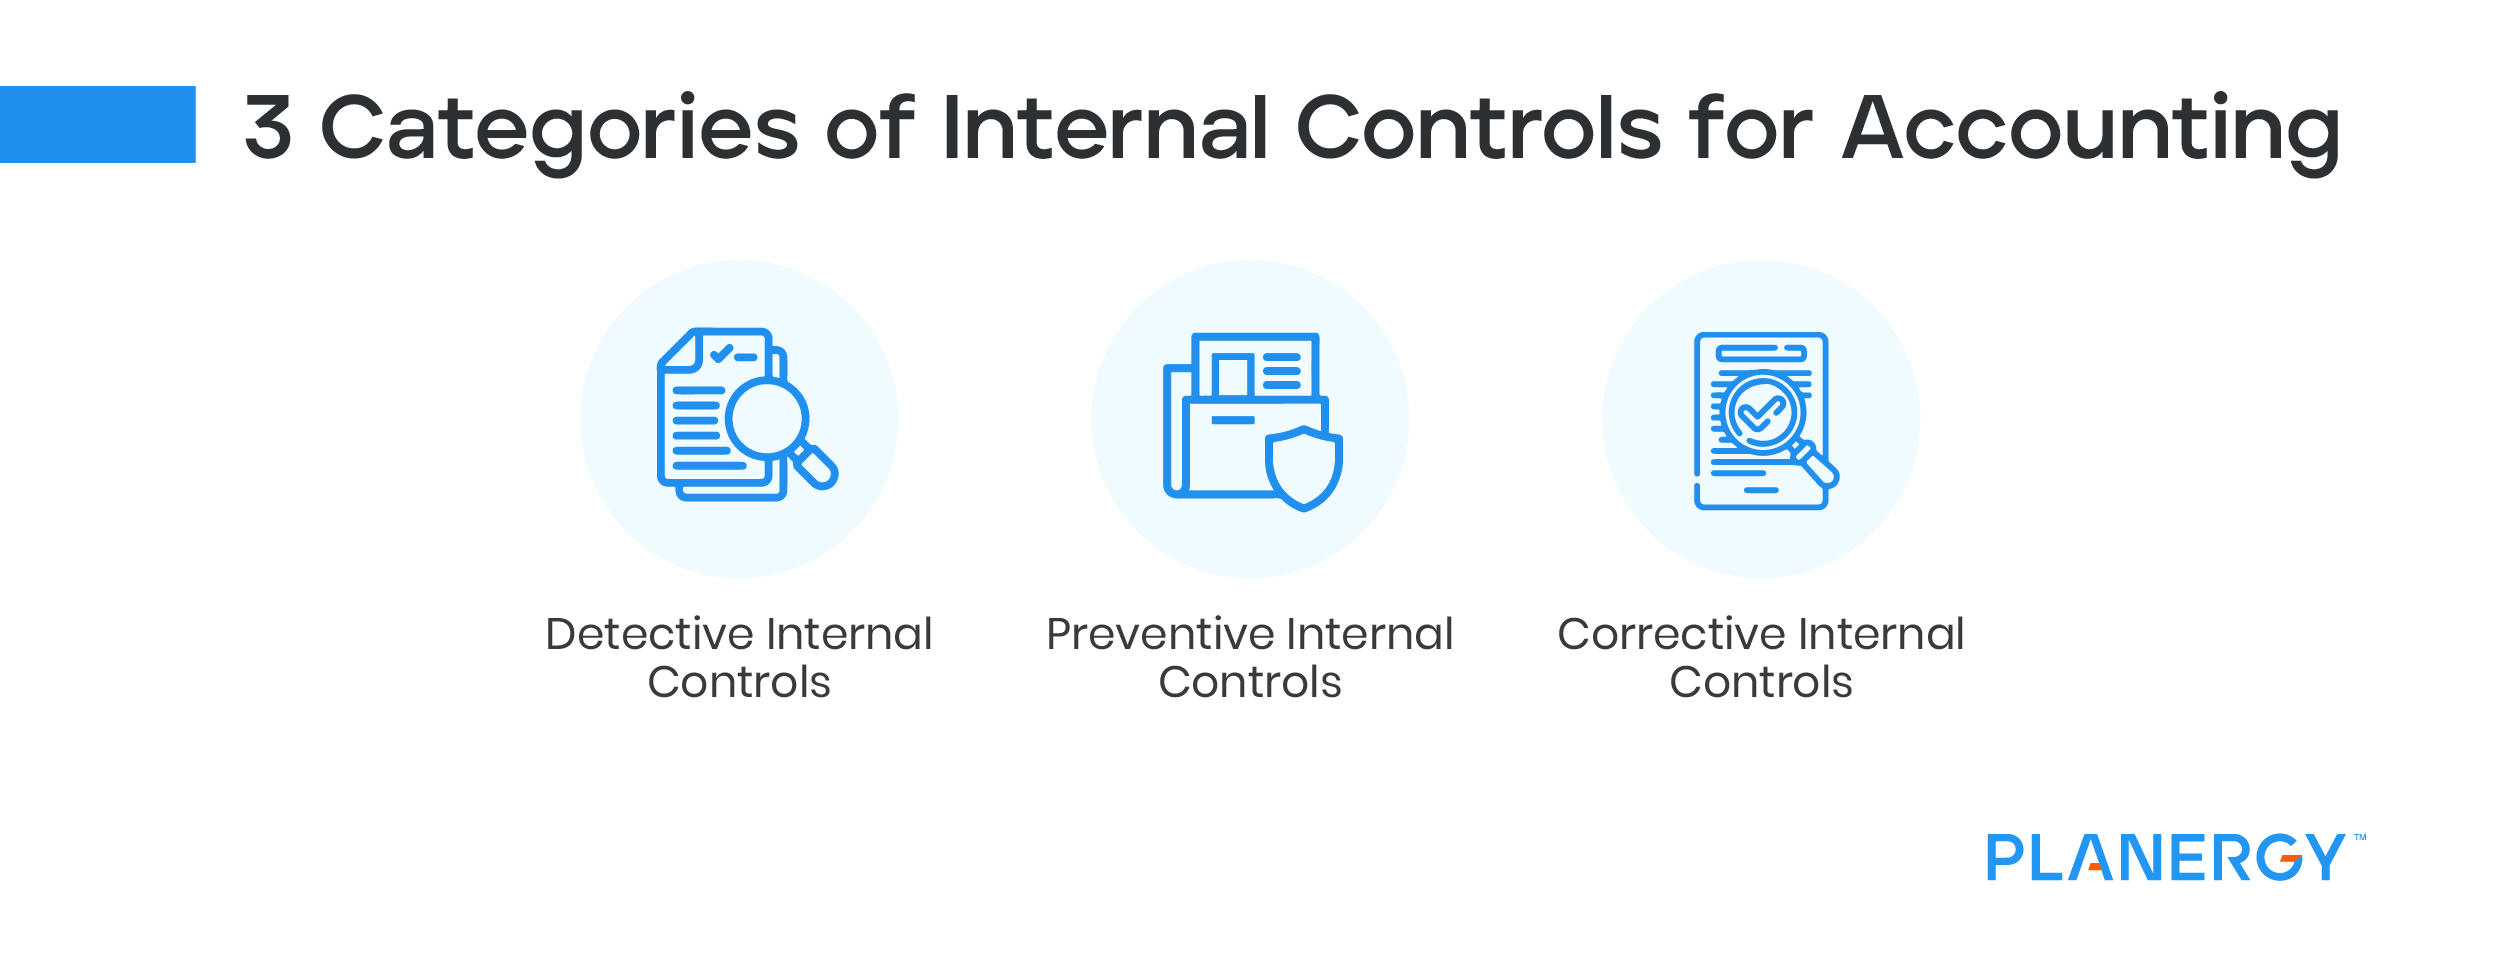 3 Categories of Internal Controls for Accounting